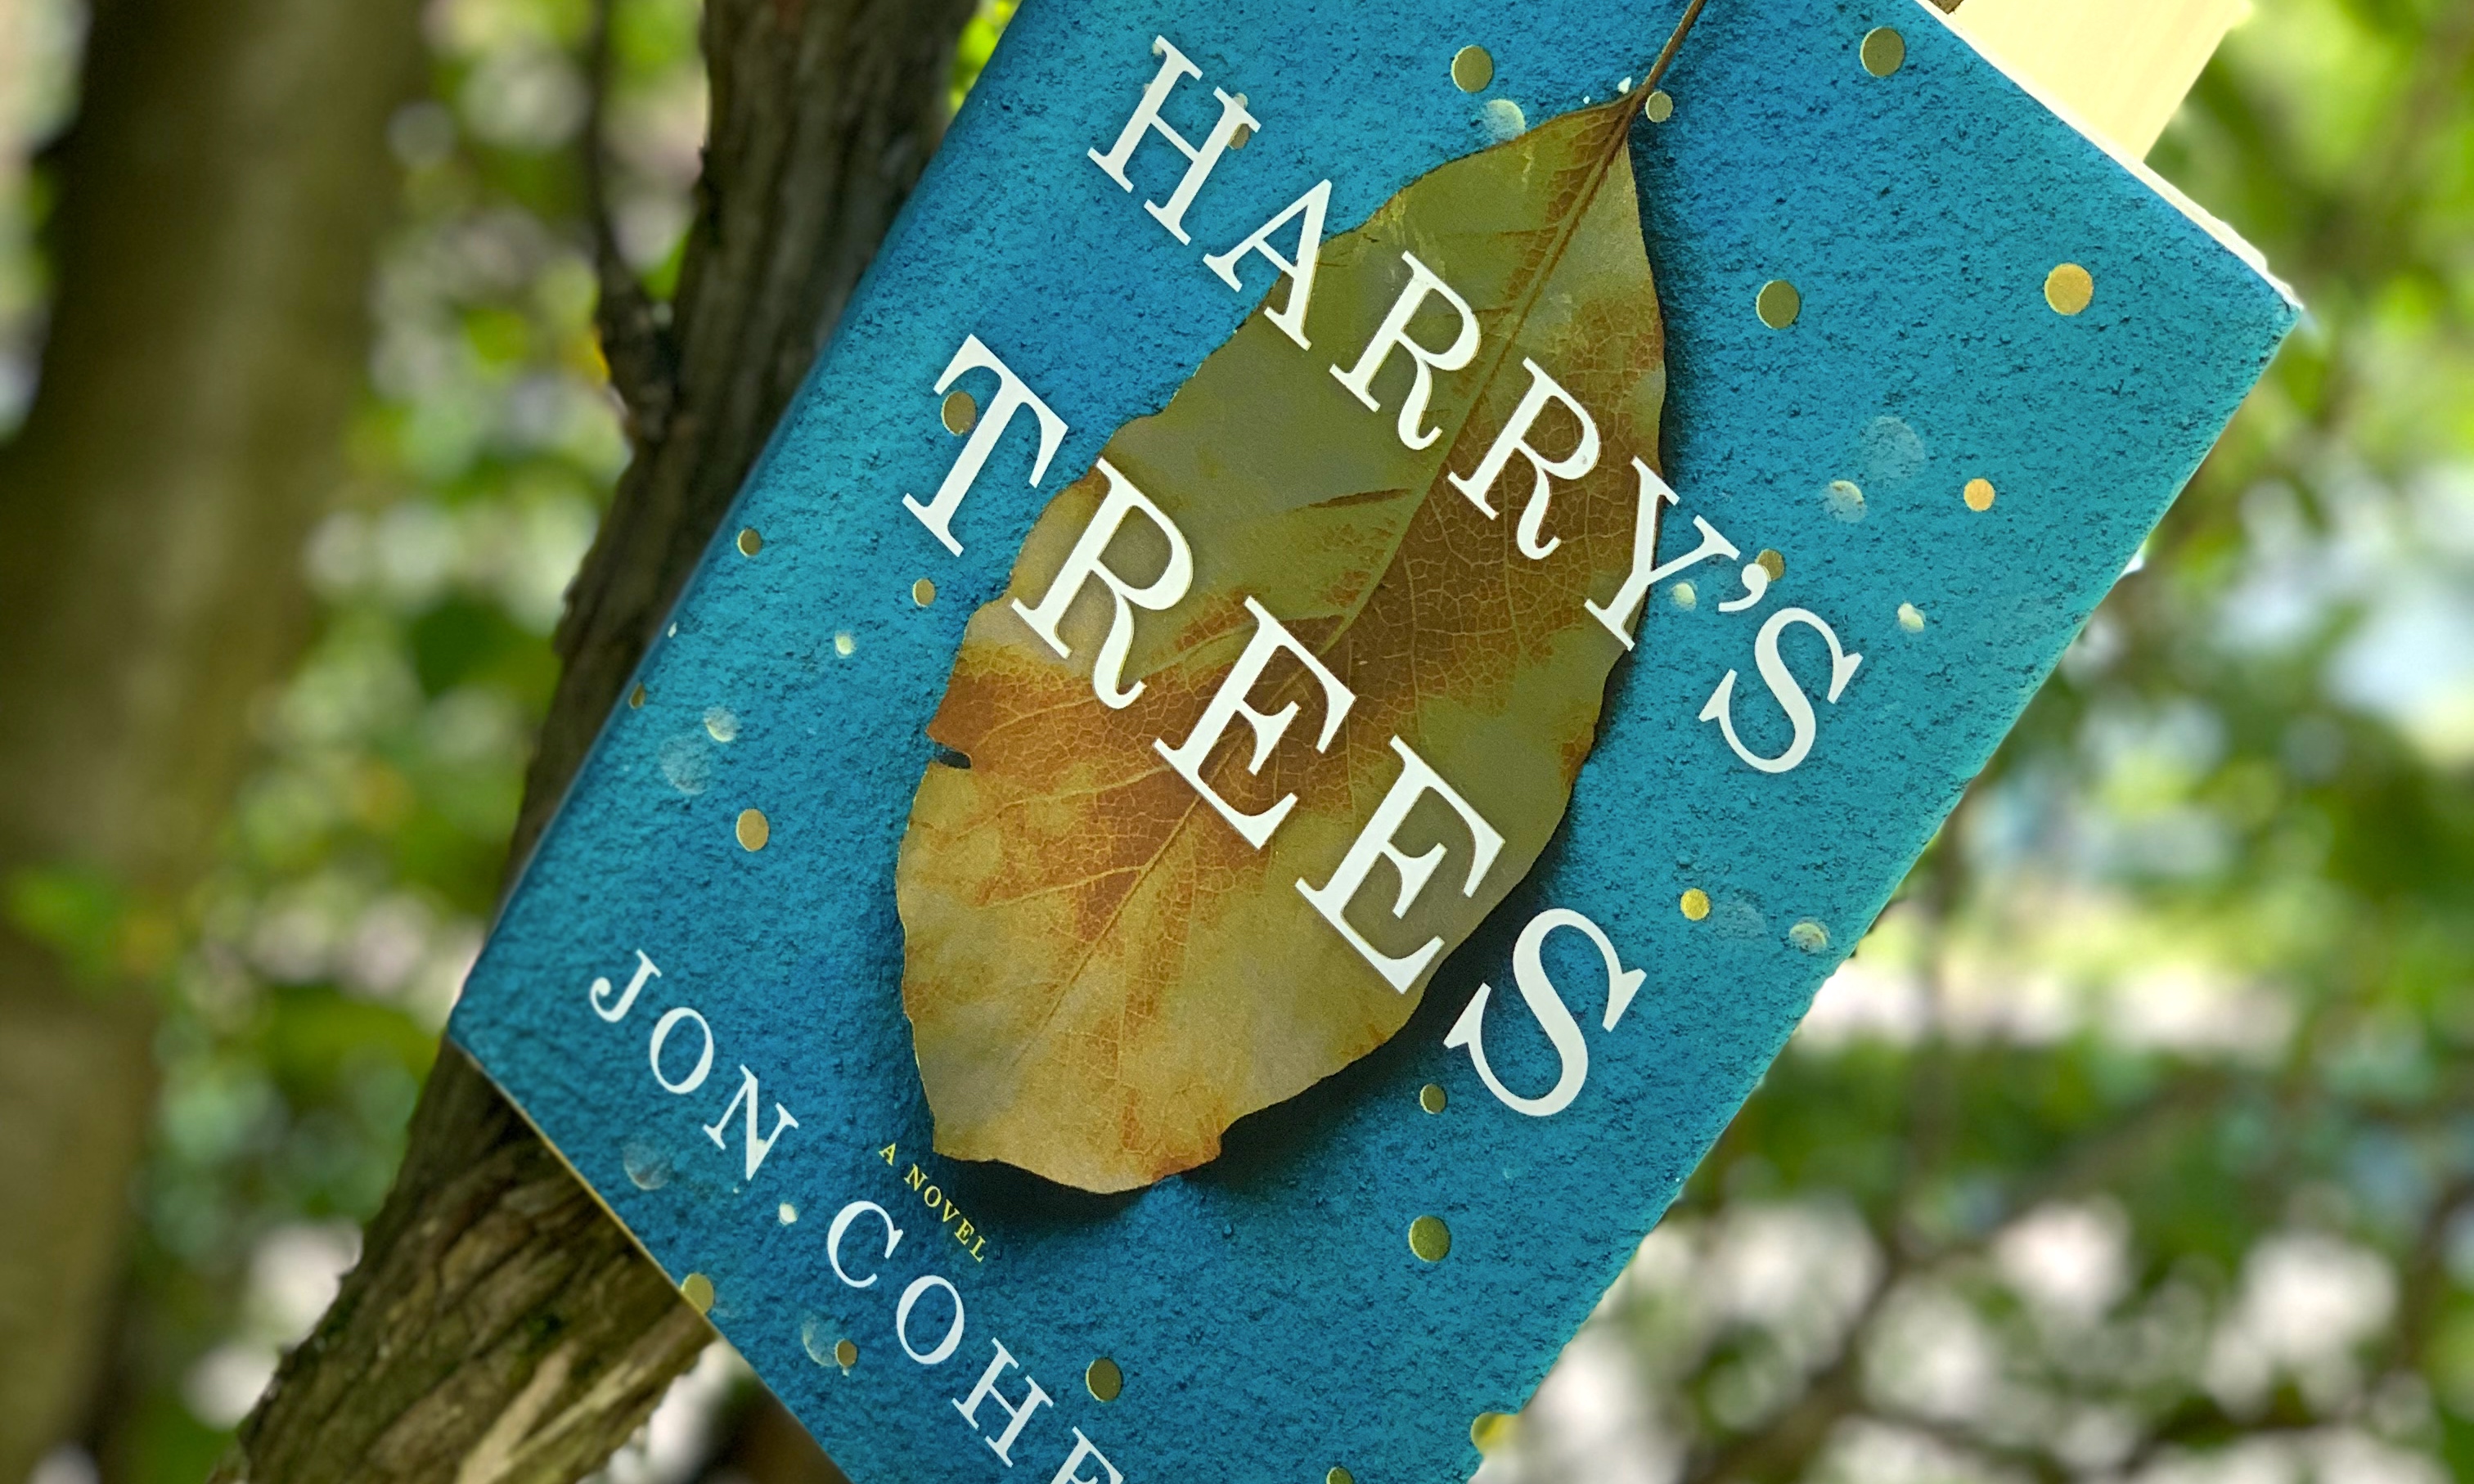 Finding Oneself in a Forest: Harry’s Trees by Jon Cohen